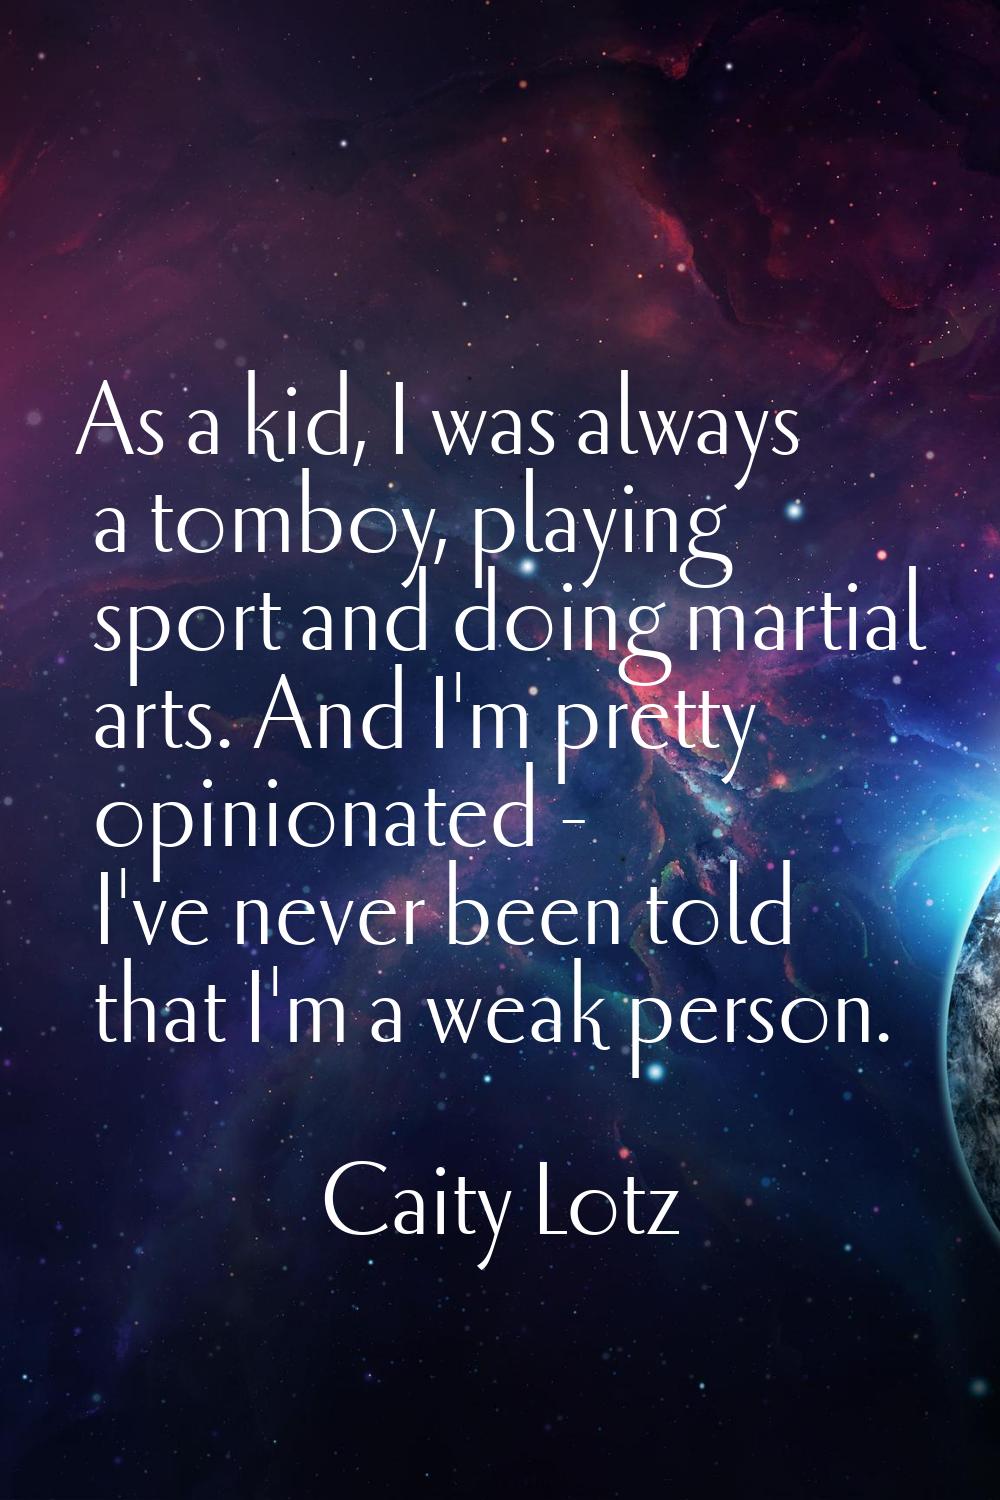 As a kid, I was always a tomboy, playing sport and doing martial arts. And I'm pretty opinionated -